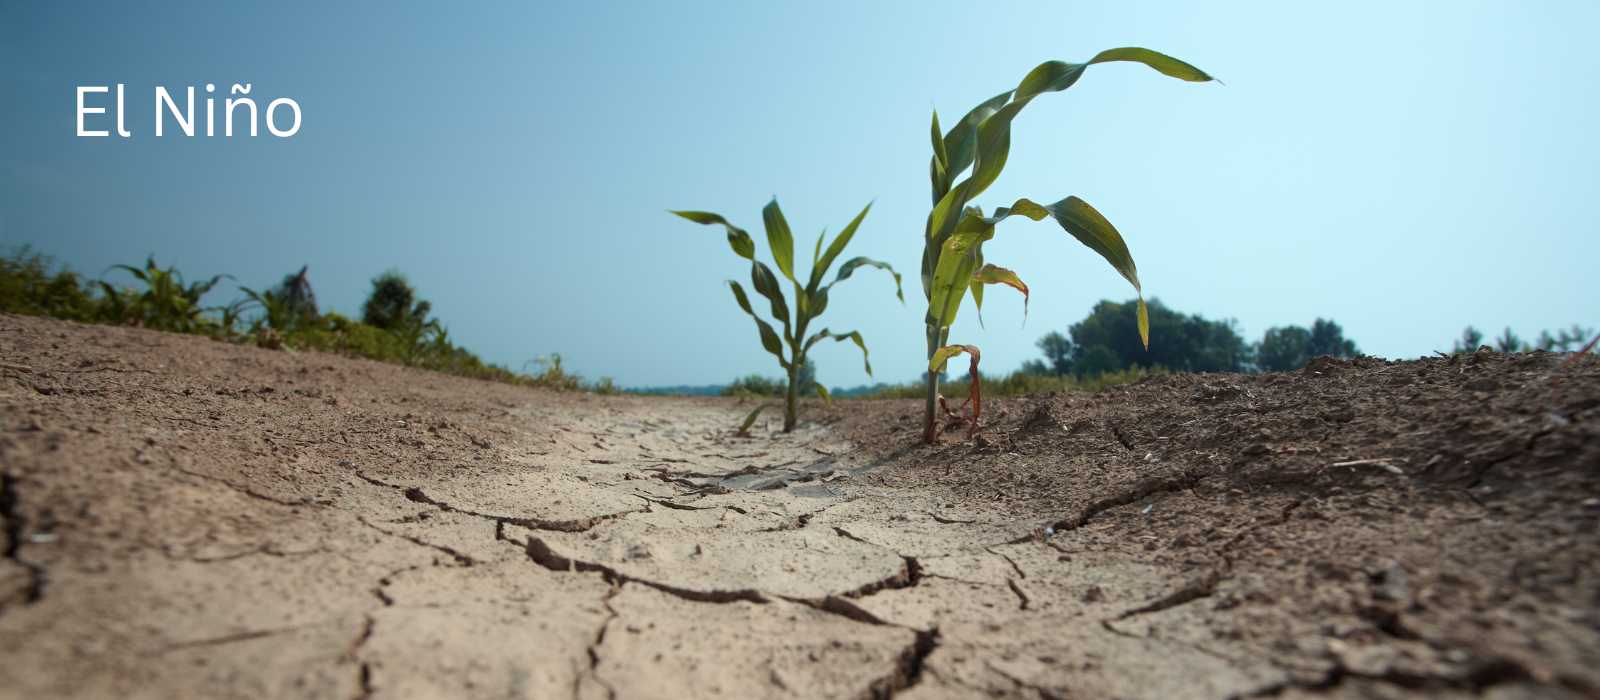 Study attributes Southern Africa drought to El Niño, tot climate change